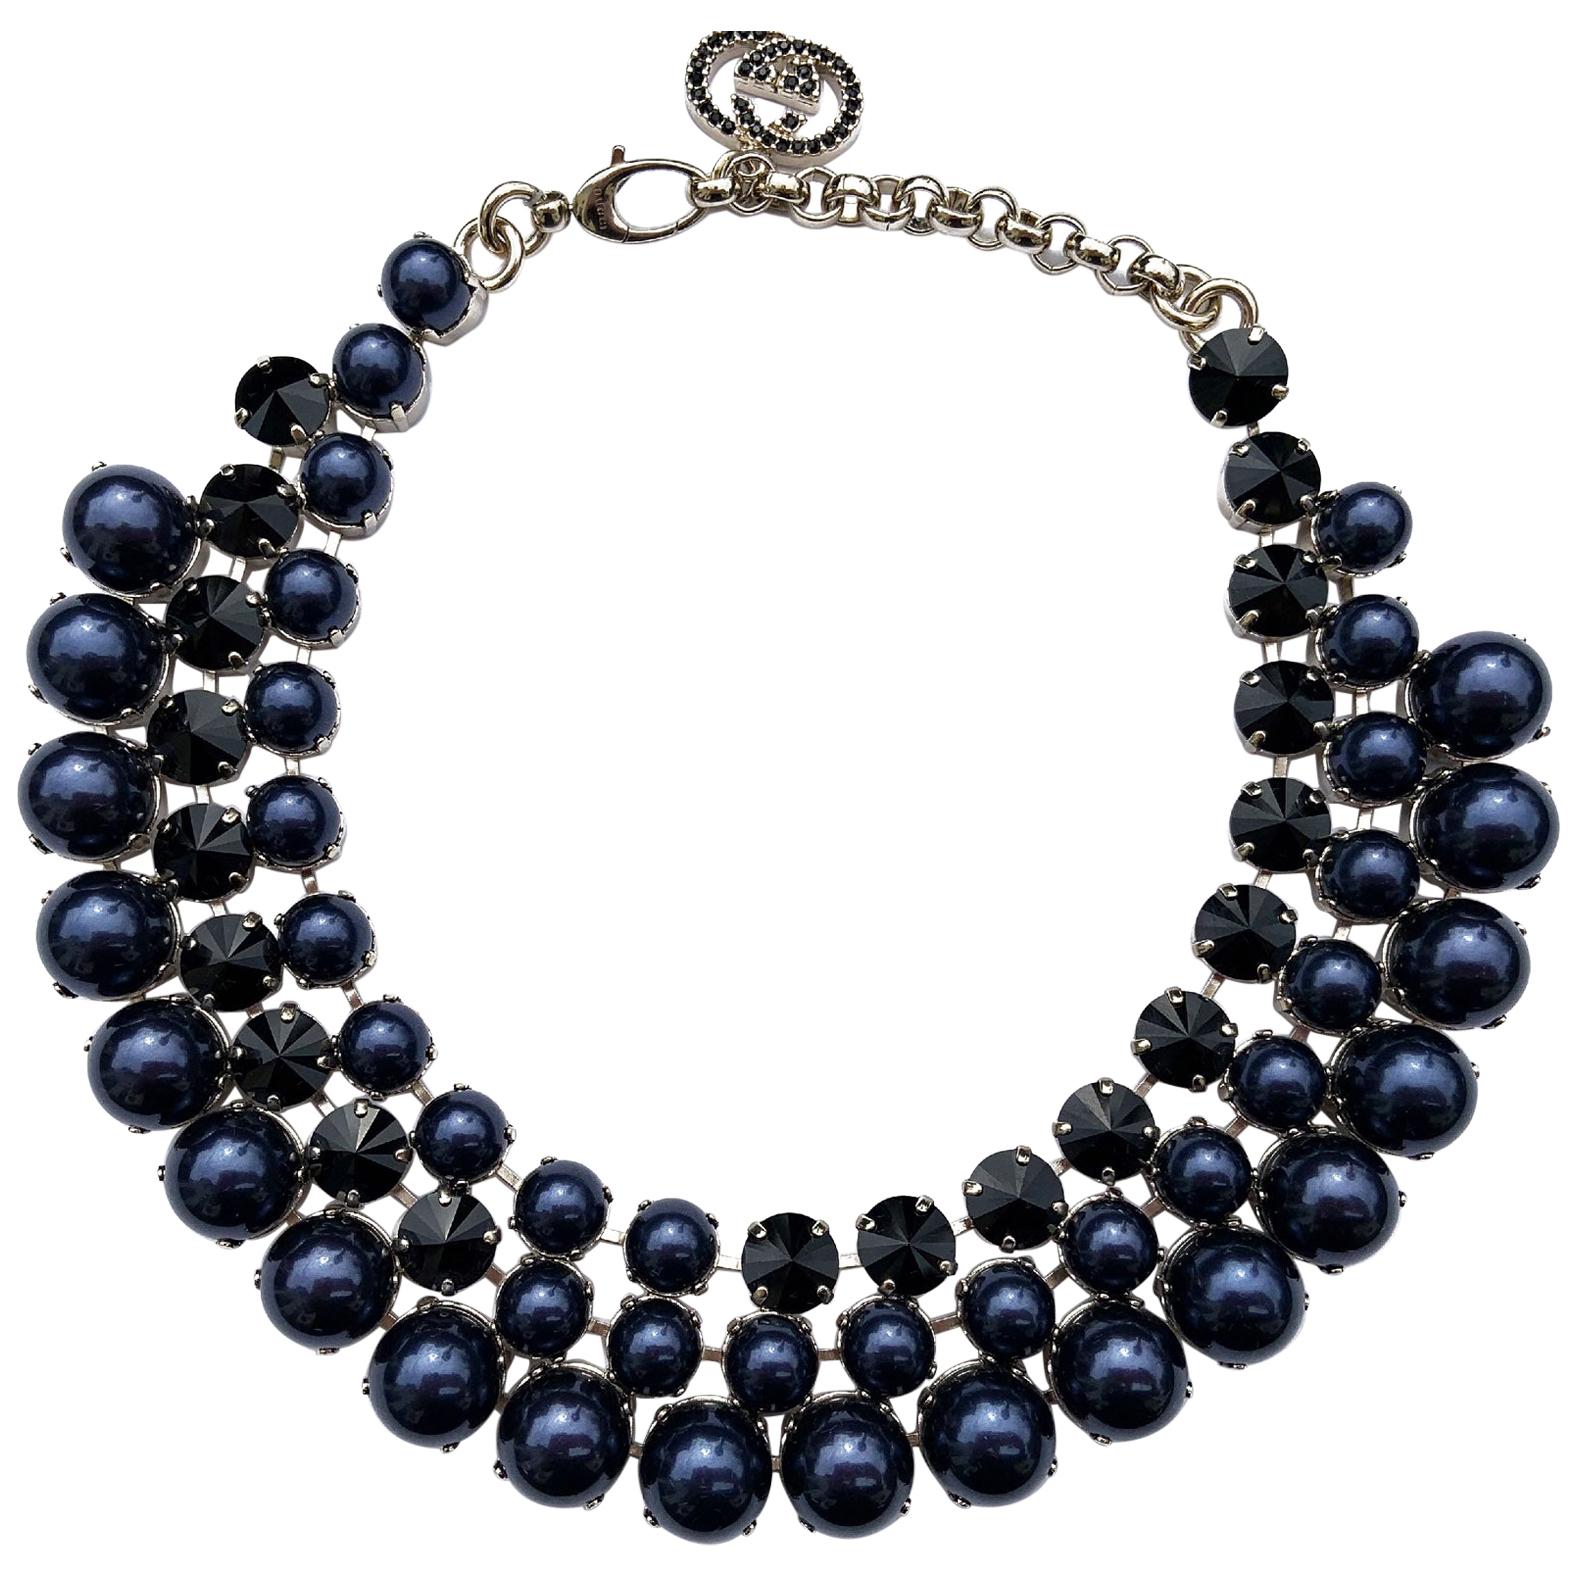 New Gucci Navy Blue Pearl Effect with Black Swarovski Crystals Necklace 